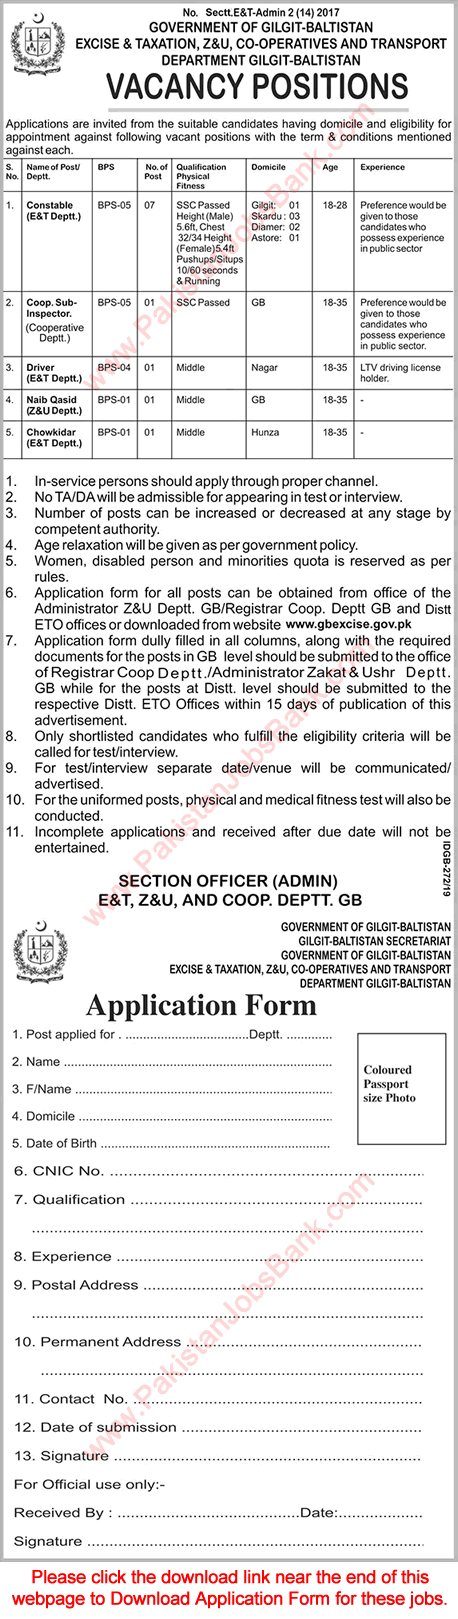 Excise and Taxation Department Gilgit Baltistan Jobs 2019 May Application Form Constables & Others Latest